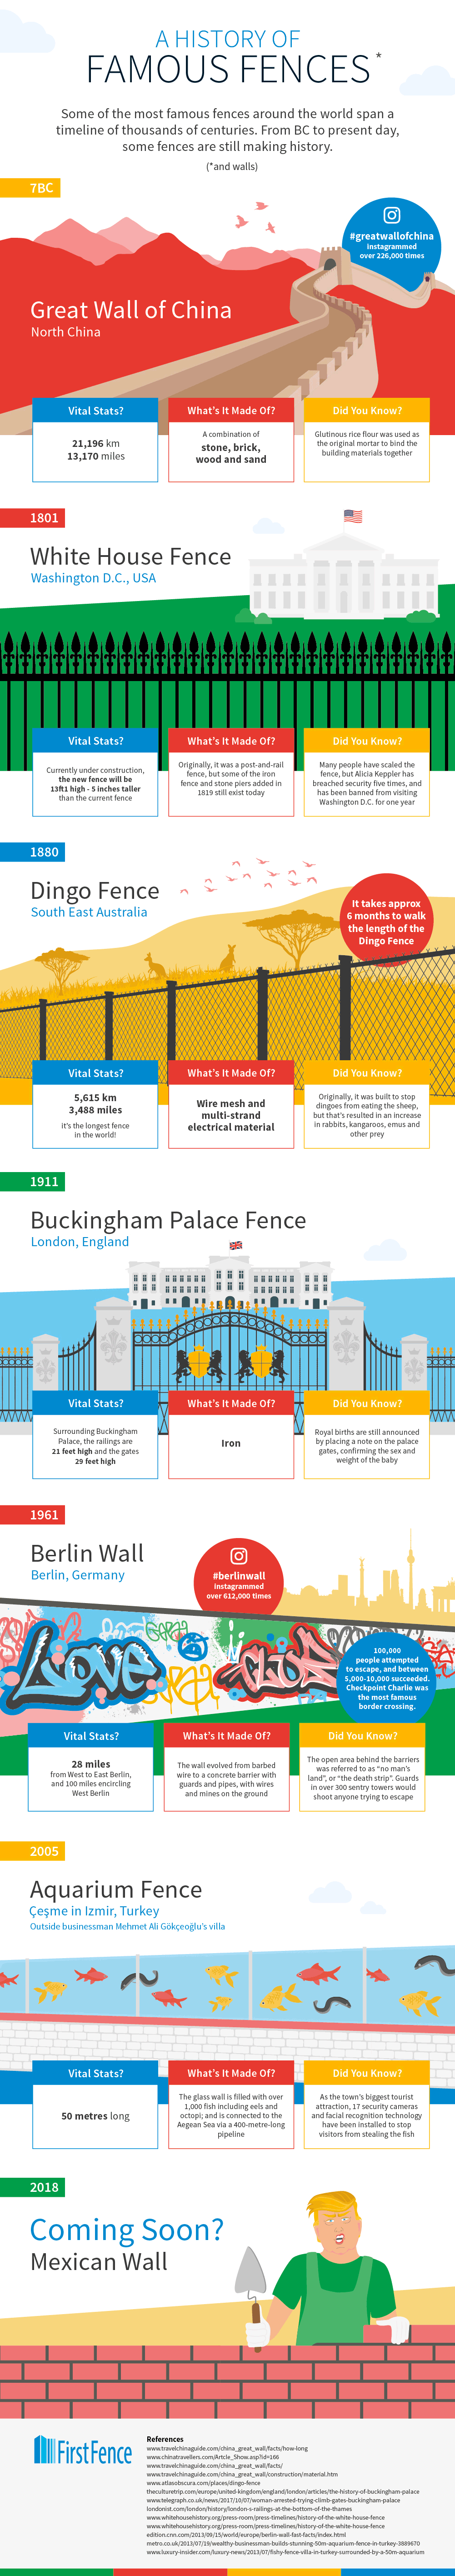 A History of Famous Fences